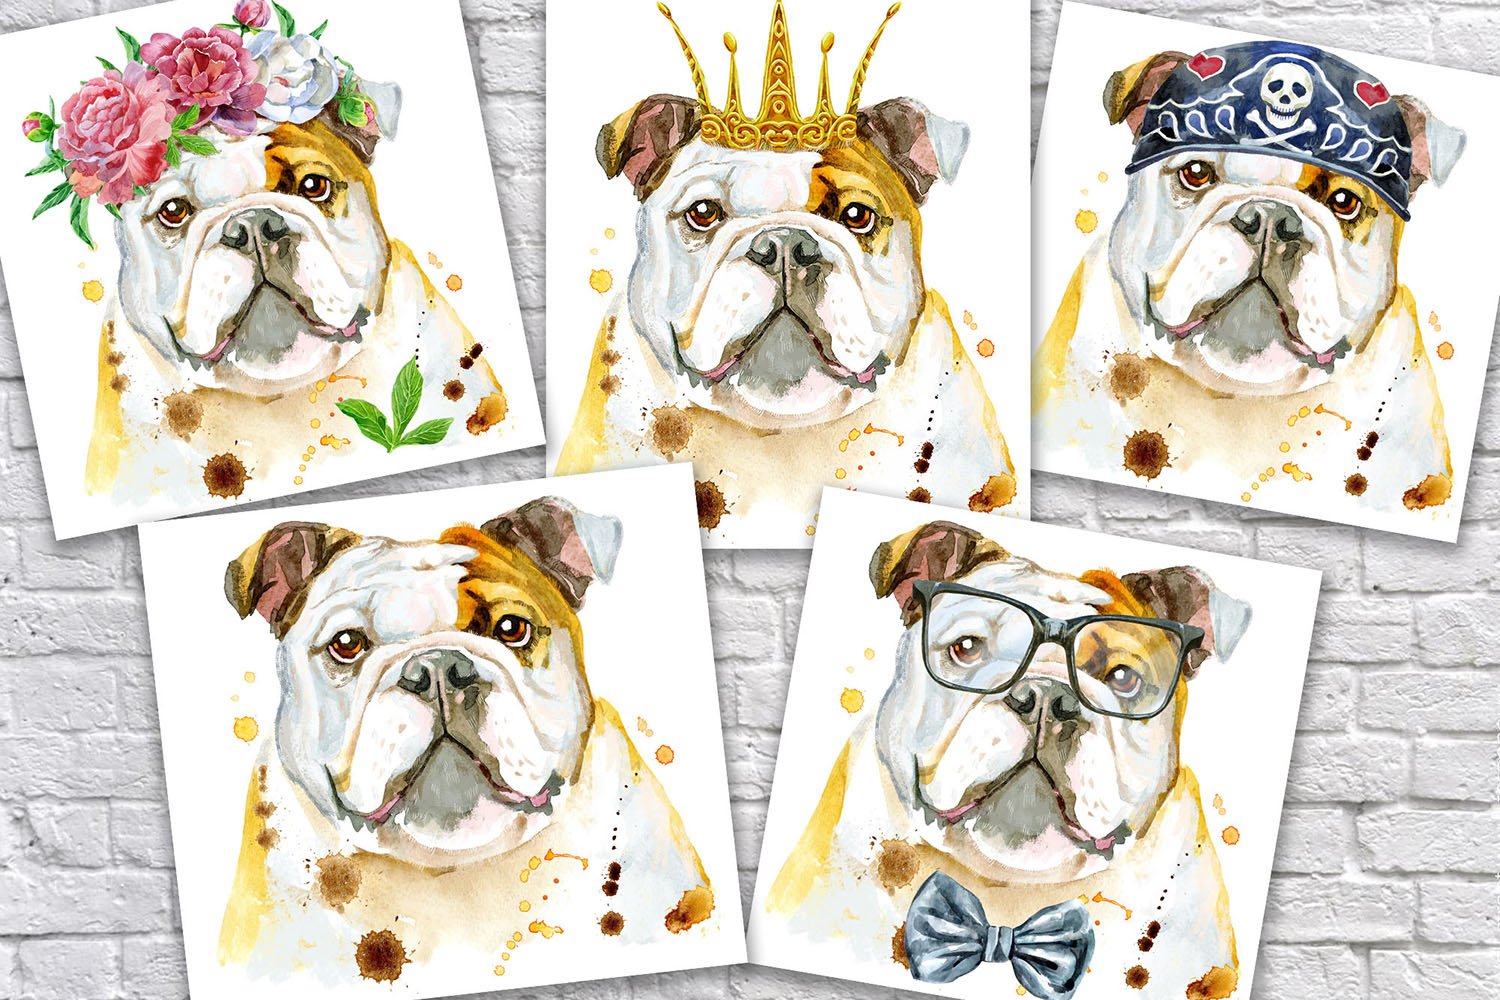 Four pictures of a bulldog wearing a crown.